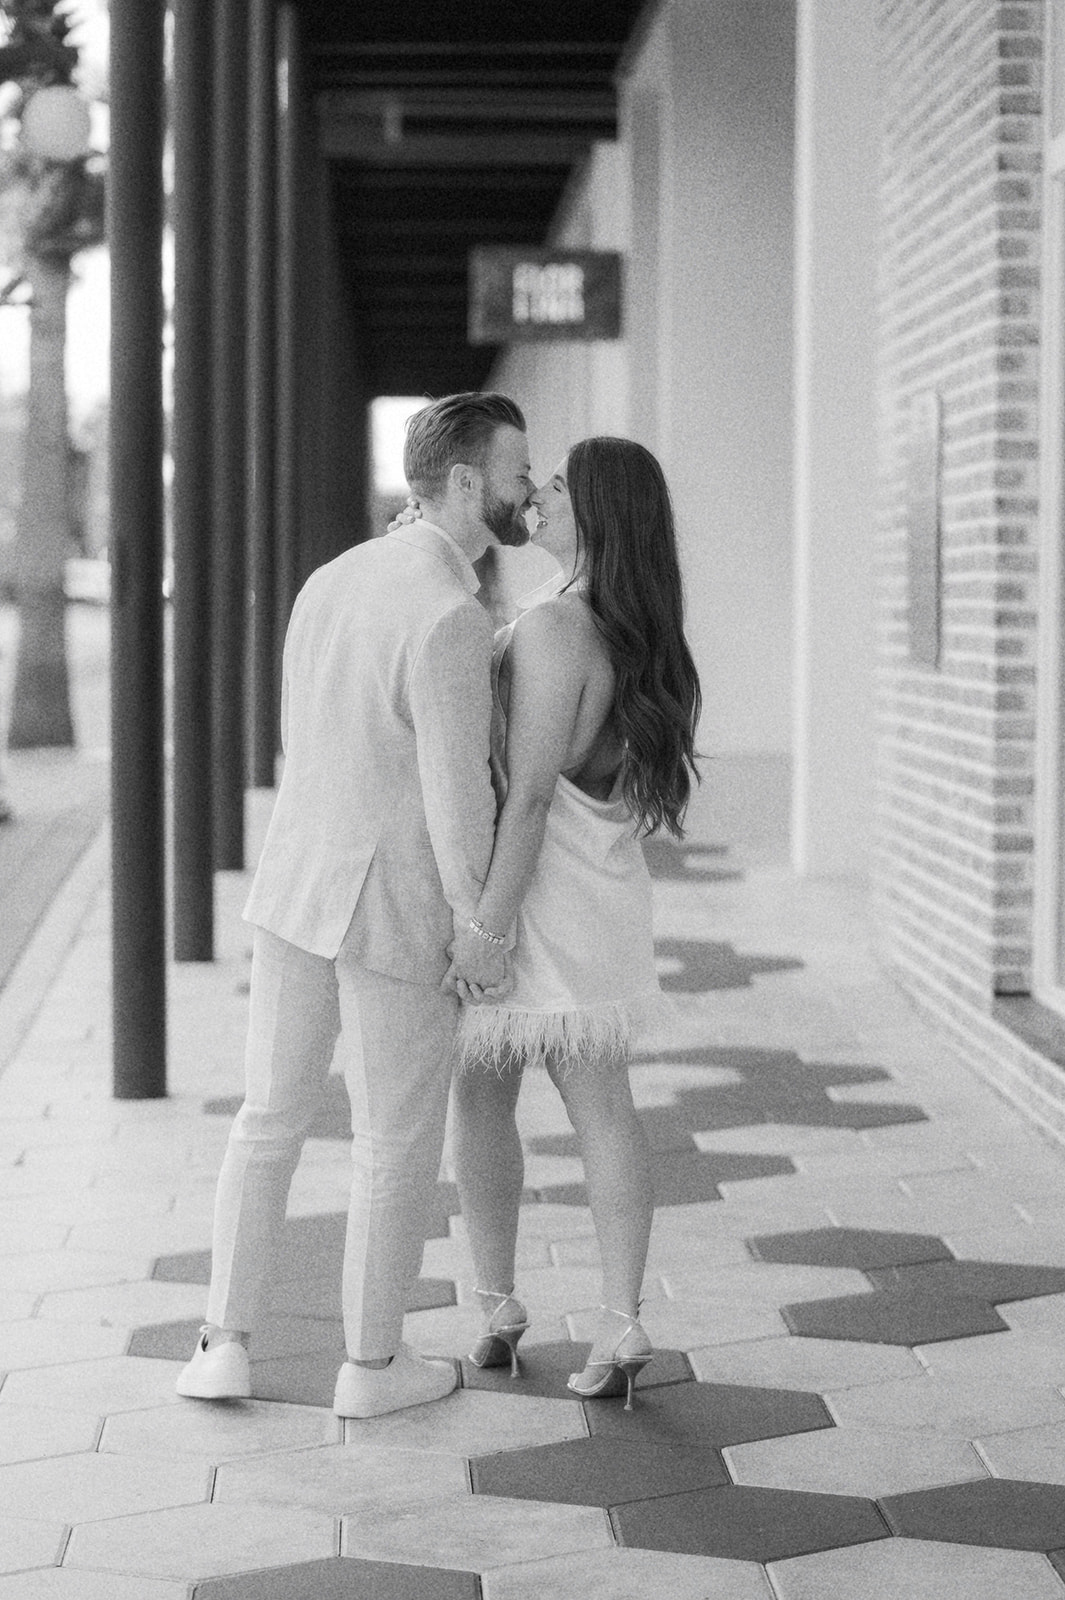 "Couple holding hands on Ybor City street, captured by Tampa photographer"
